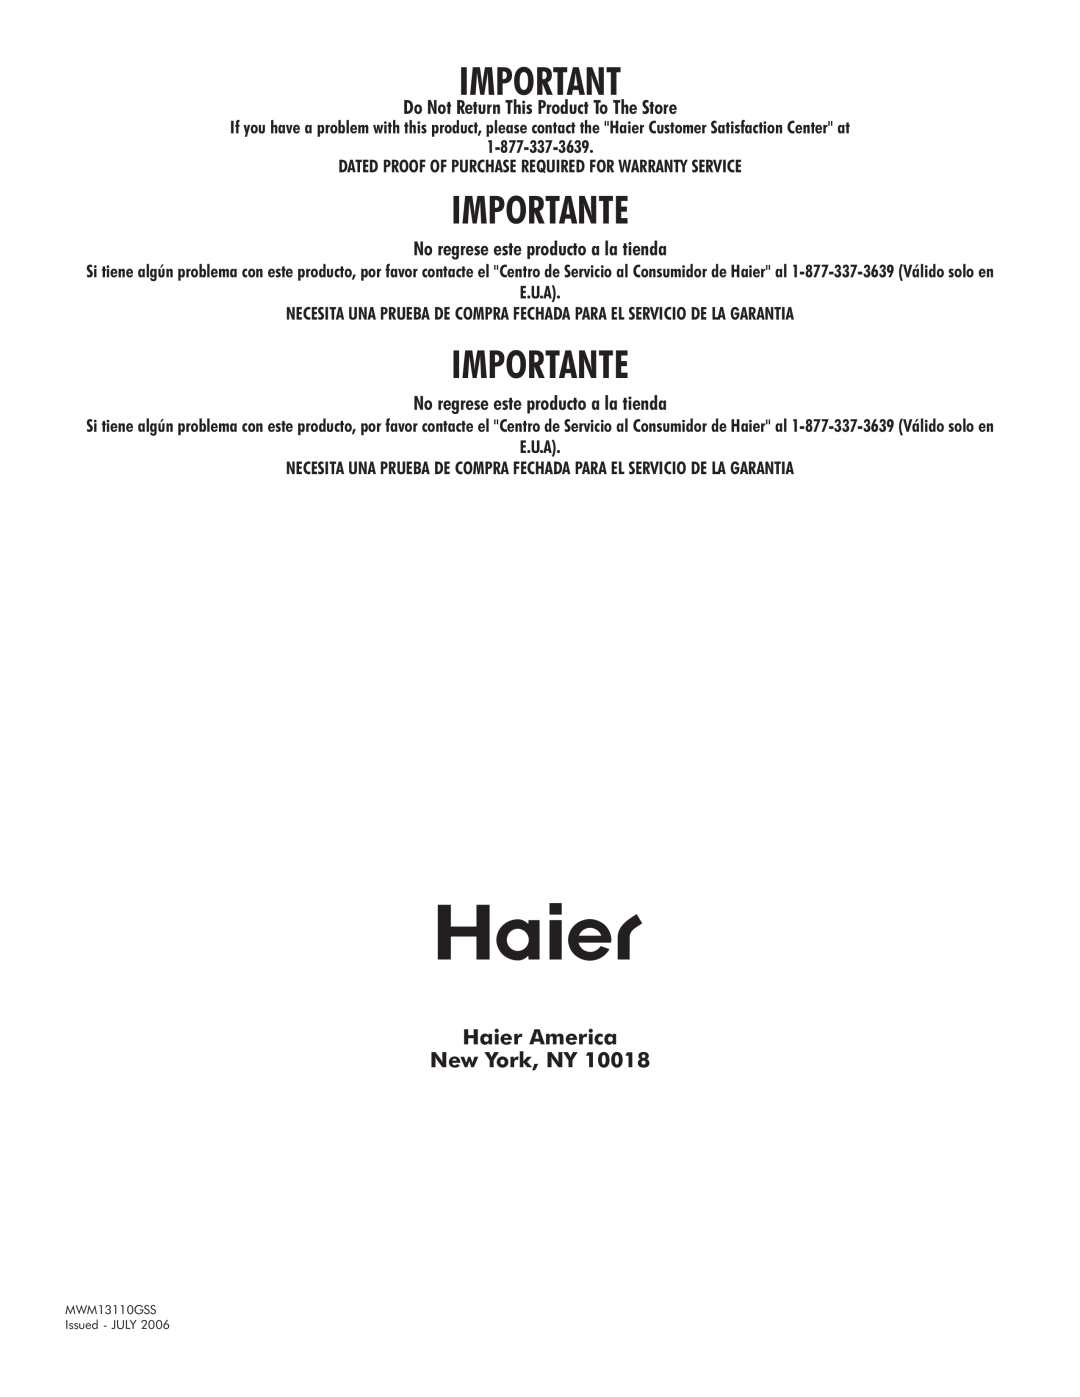 Haier MWM13110GSS owner manual Importante, Haier America New York, NY, Do Not Return This Product To The Store, E.U.A 